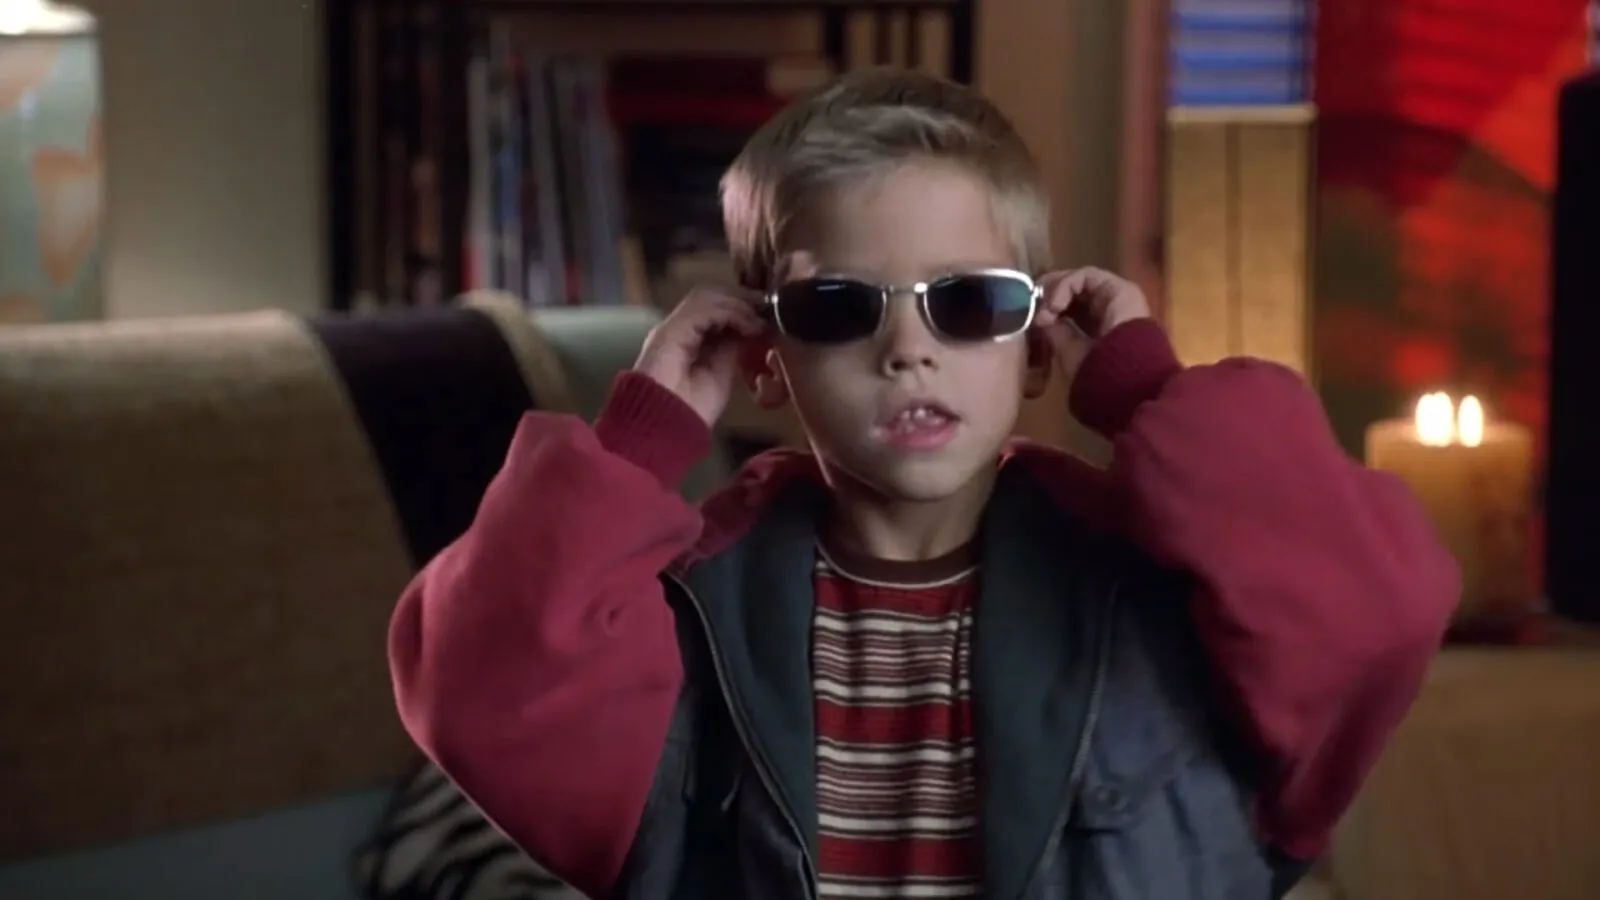 What Happened to the Kid From 'Big Daddy'?